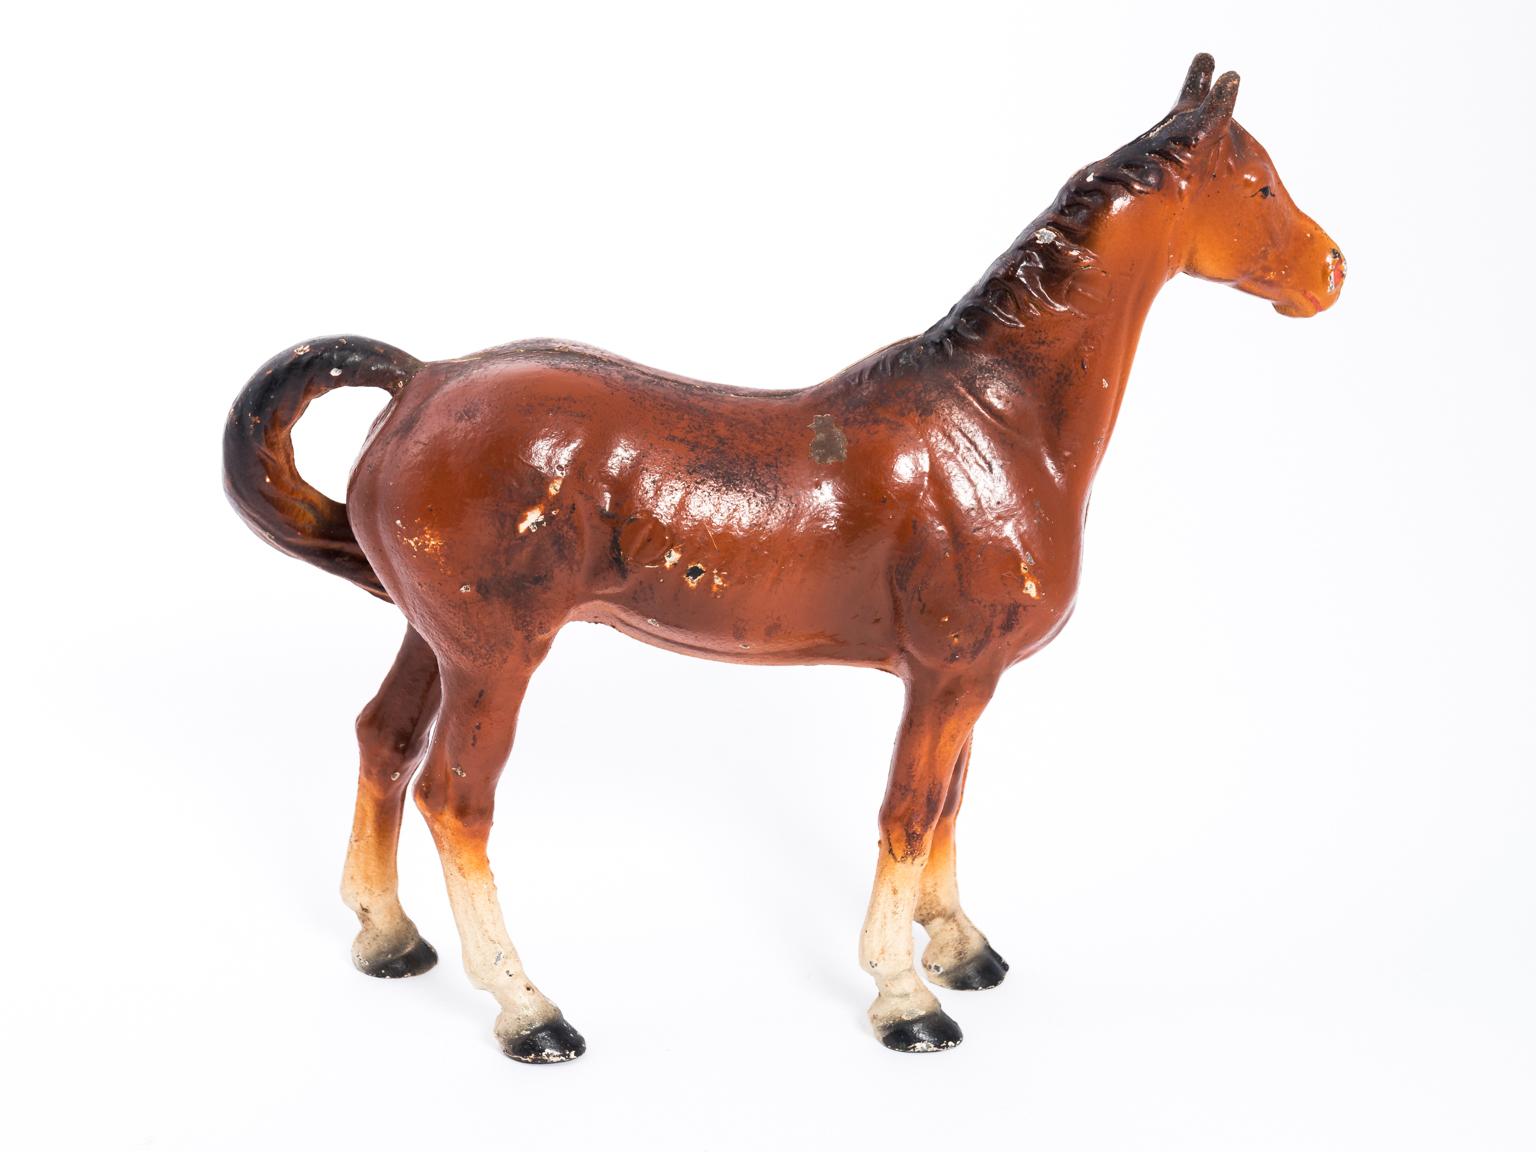 All original Hubley thoroughbred cast iron horse. It has original paint with mild wear and chipping. No breaks, cracks, or repairs to cast iron. Some slight oxidation to tips of ears. No touch ups or repaint. Horse retains the majority of its